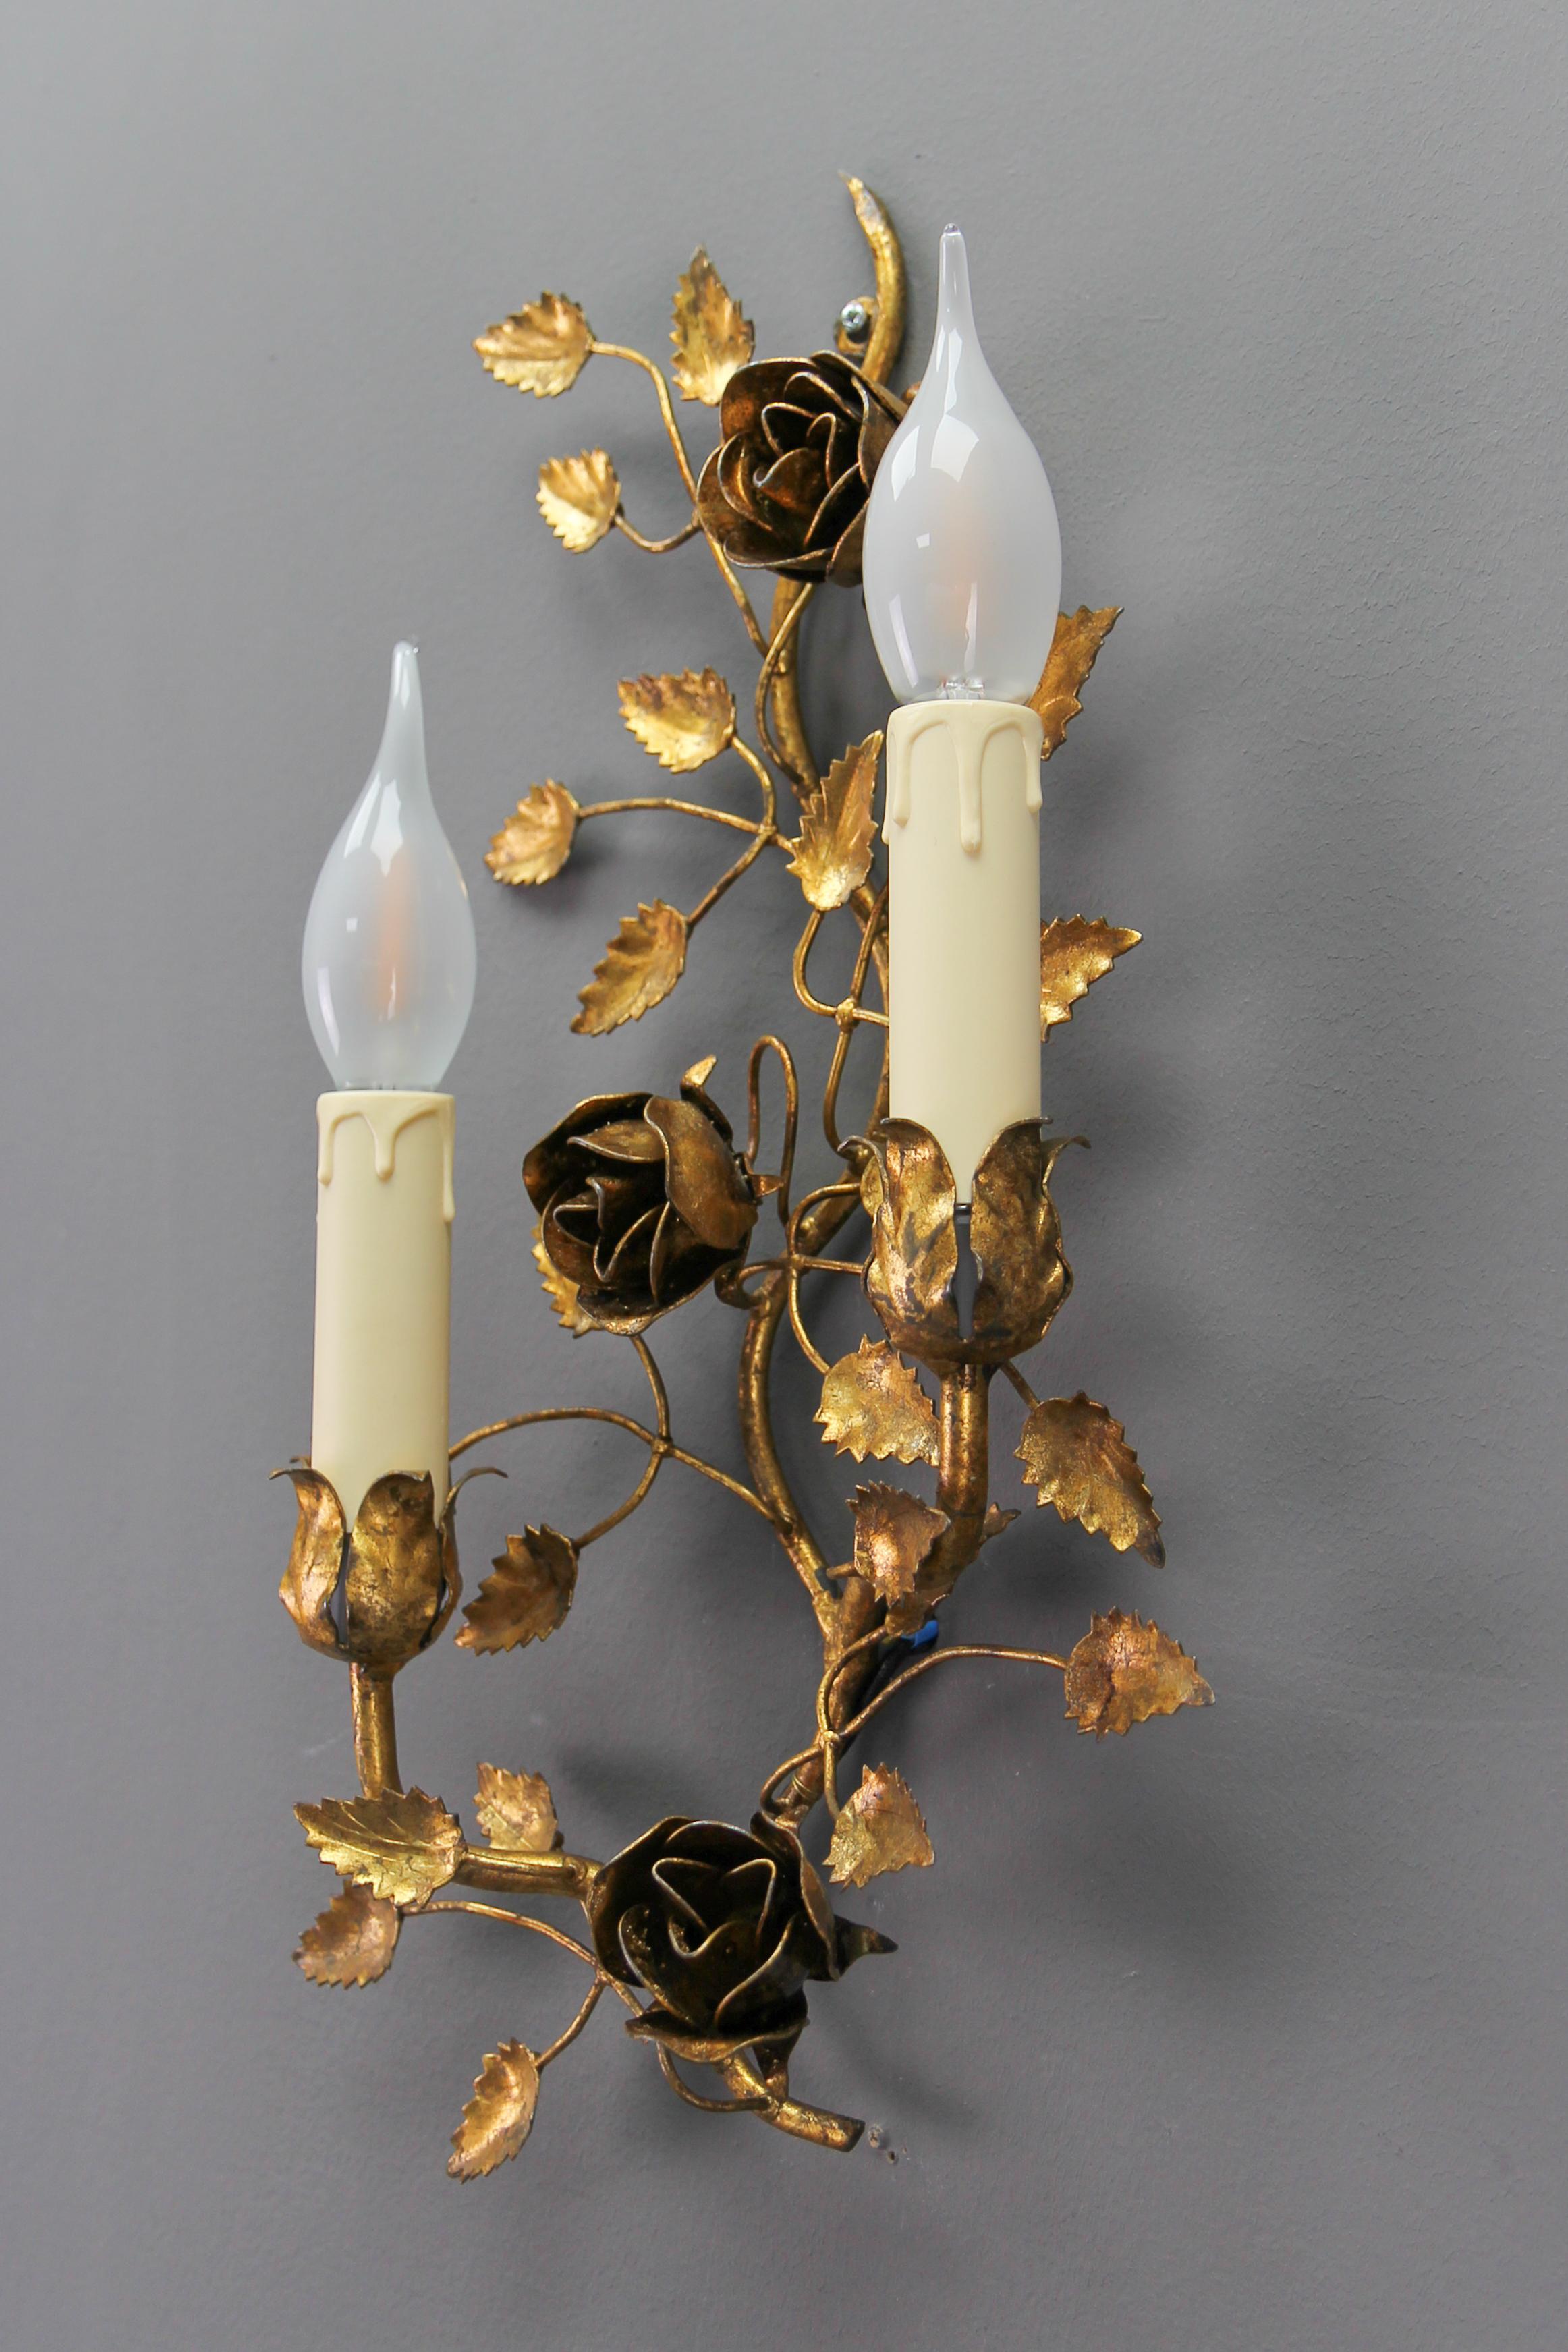 Gilt Metal Two-Light Wall Sconce with Roses and Leaf, Italy, the 1970s.
This adorable Hollywood Regency-style gilt metal wall sconce features a floral design - two arms in the shape of roses with leaves.
Two new sockets for E14 size light bulbs,